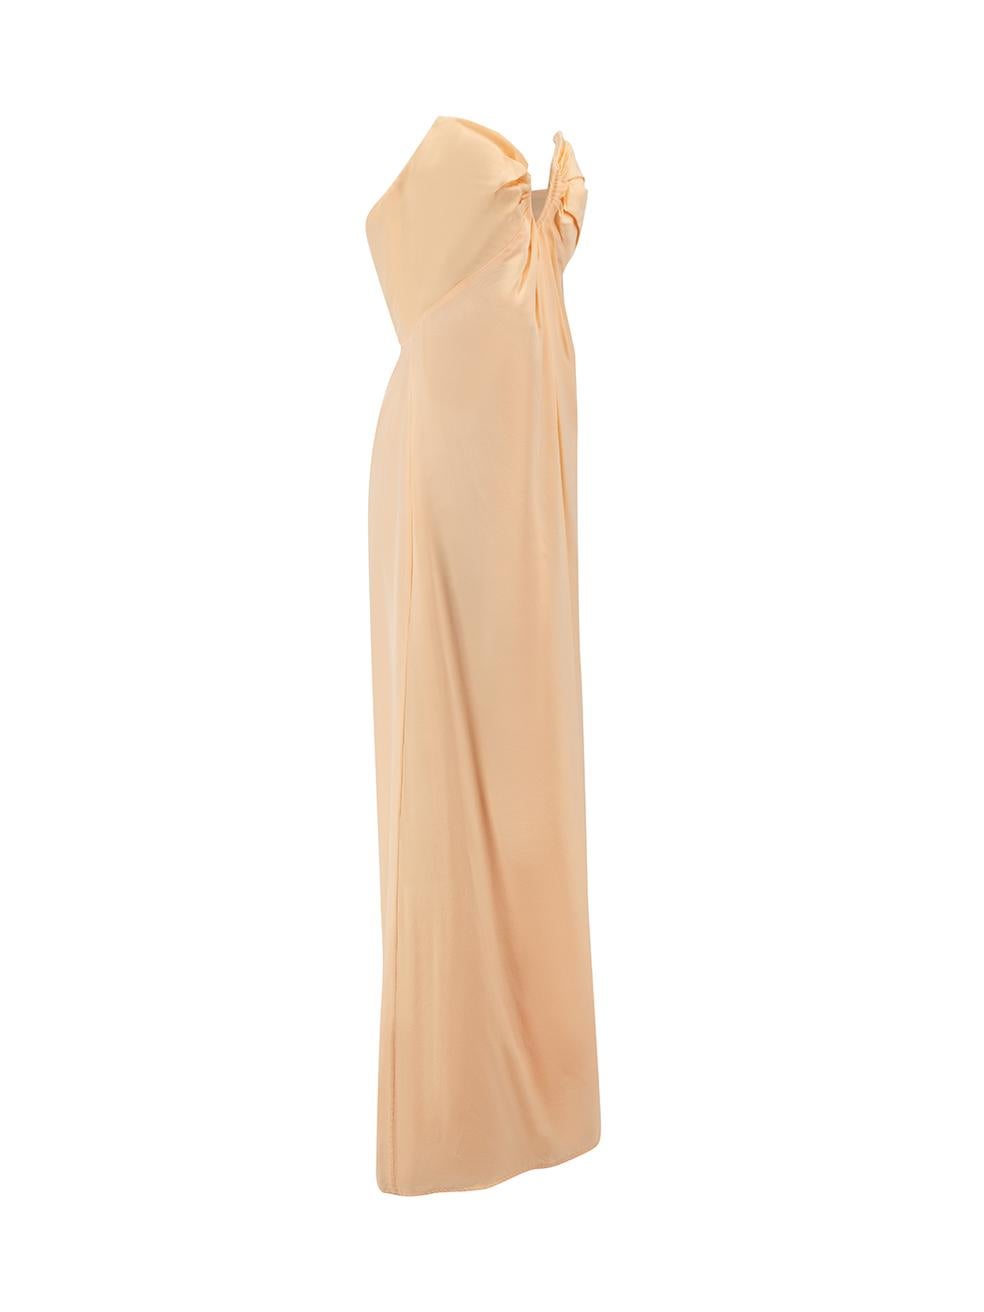 CONDITION is Very good. Minimal wear to dress is evident. Minimal wear to the front of this dress with a small stain on the bust on this used Zimmermann designer resale item.



Details


Pink

Silk

Dress

Strapless

Sweetheart neckline

Maxi